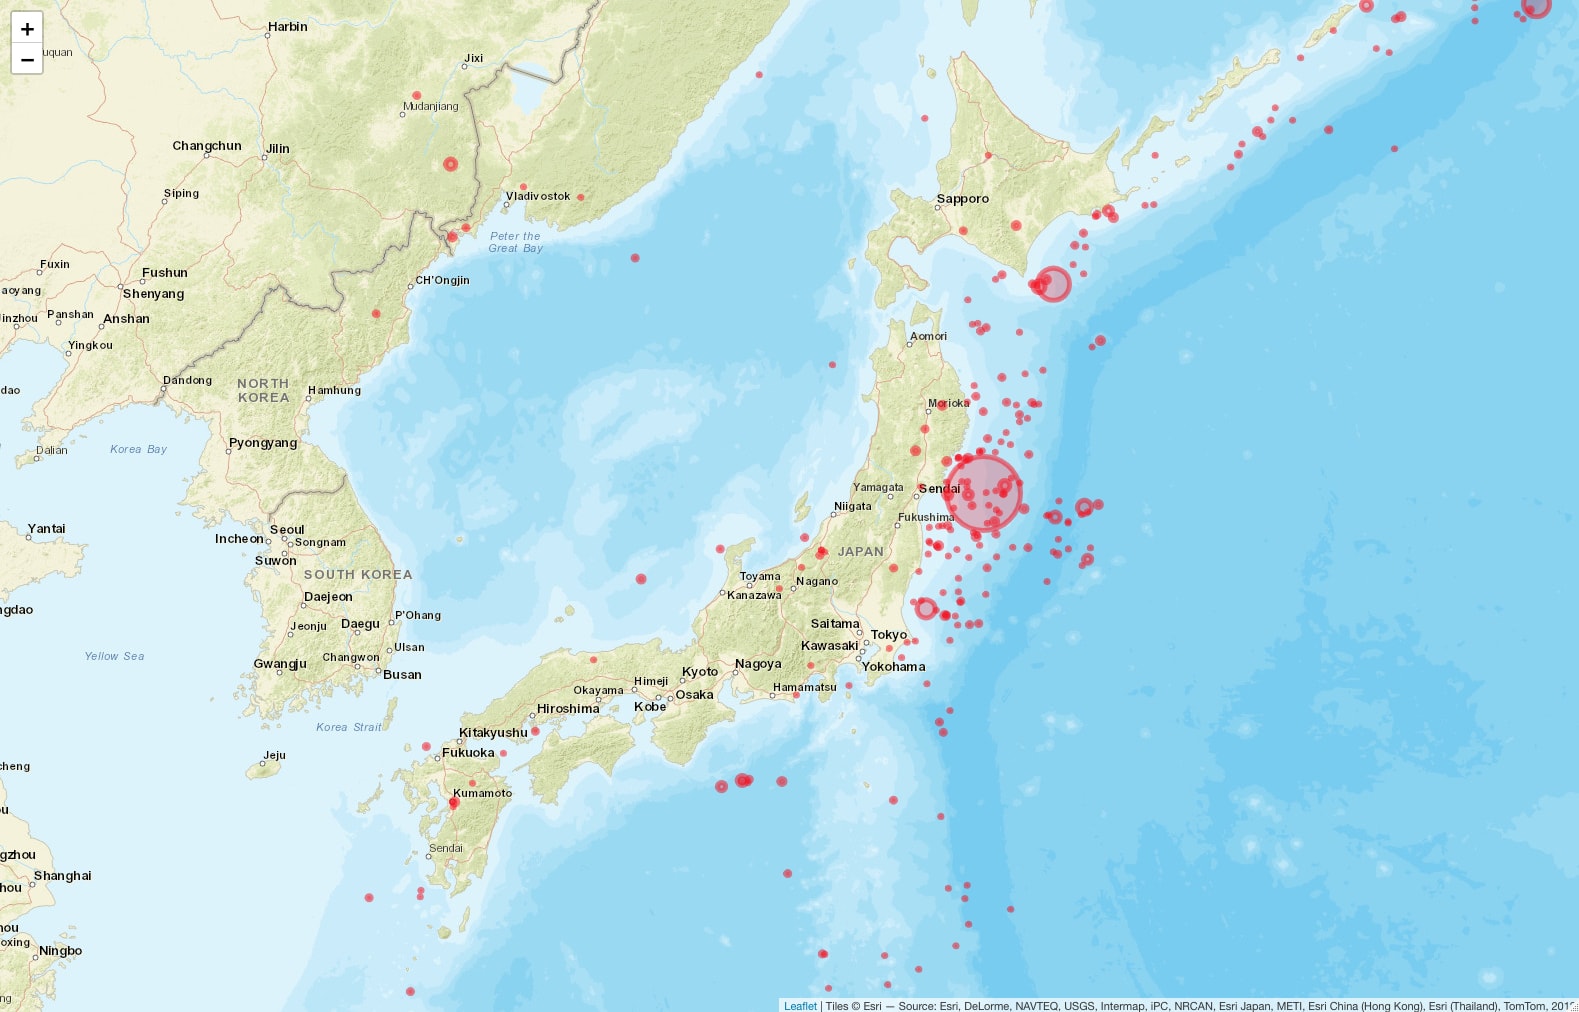 Image 6 - Geomap of Earthquakes near Japan from 2001 to 2018 (styled markers v2)